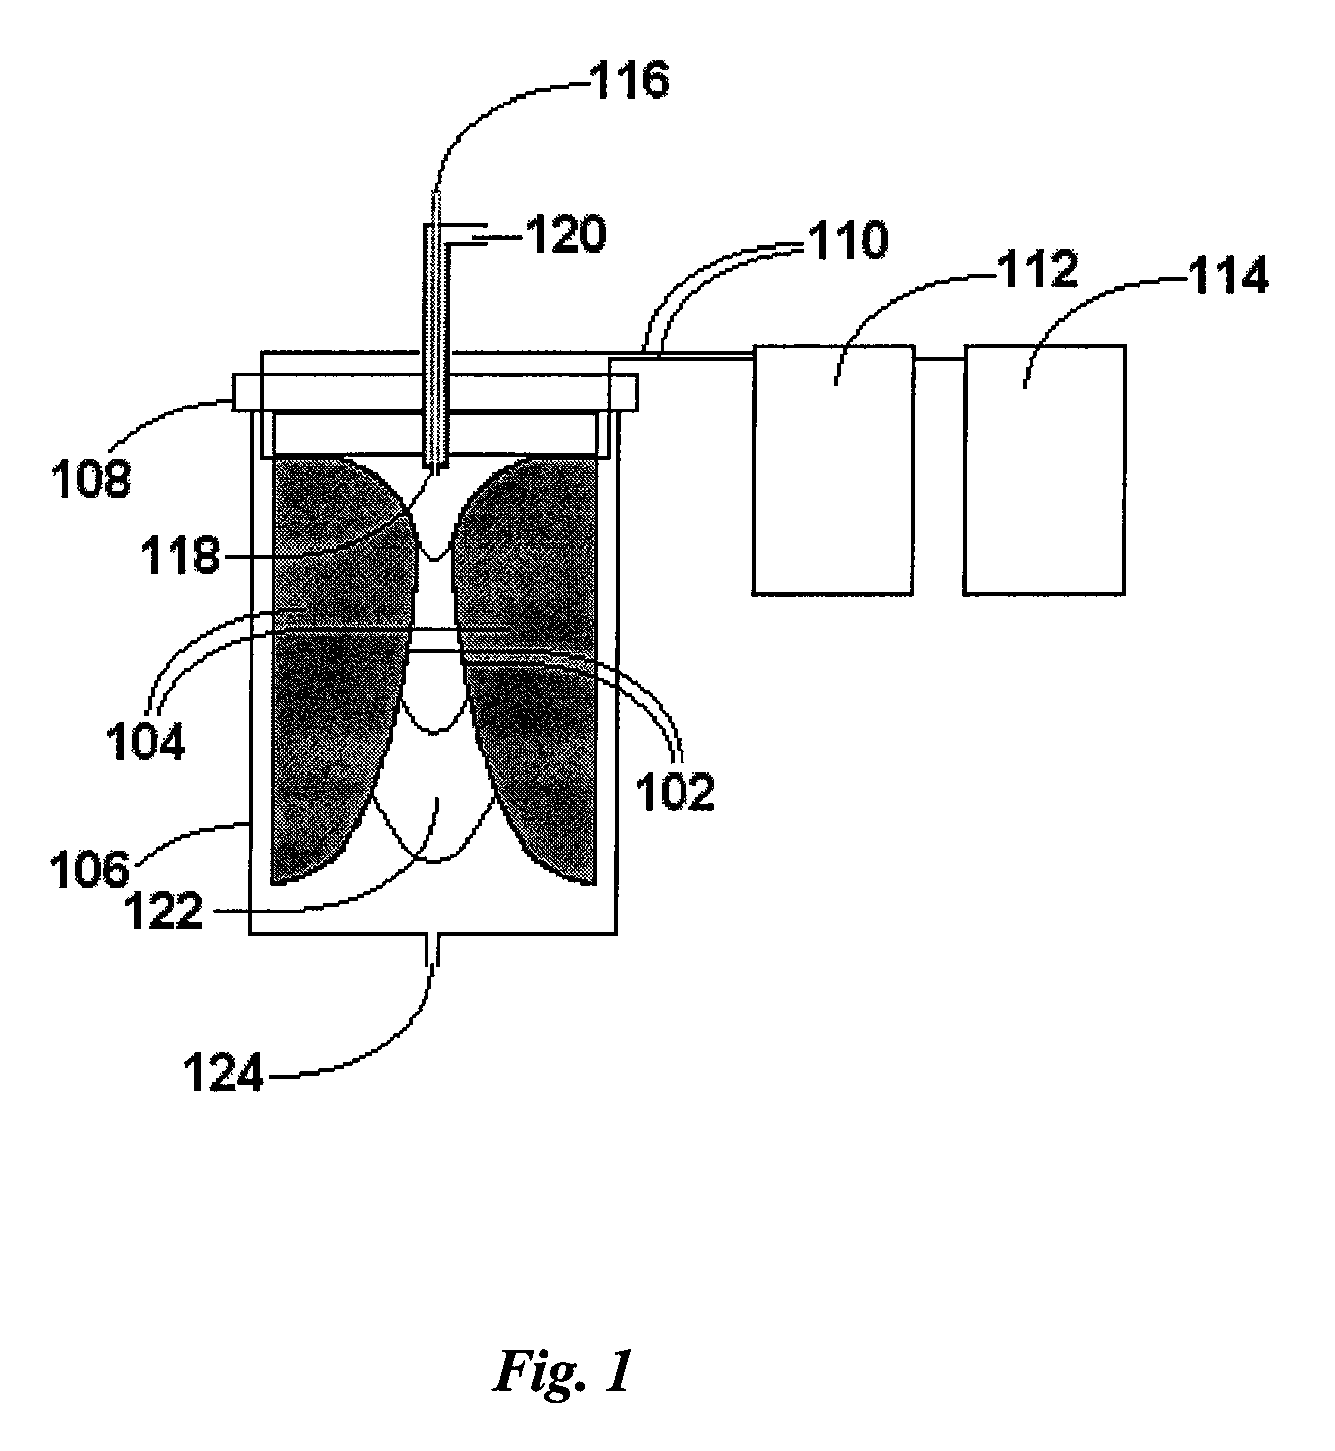 Pulsed gliding arc electrical discharge reactors